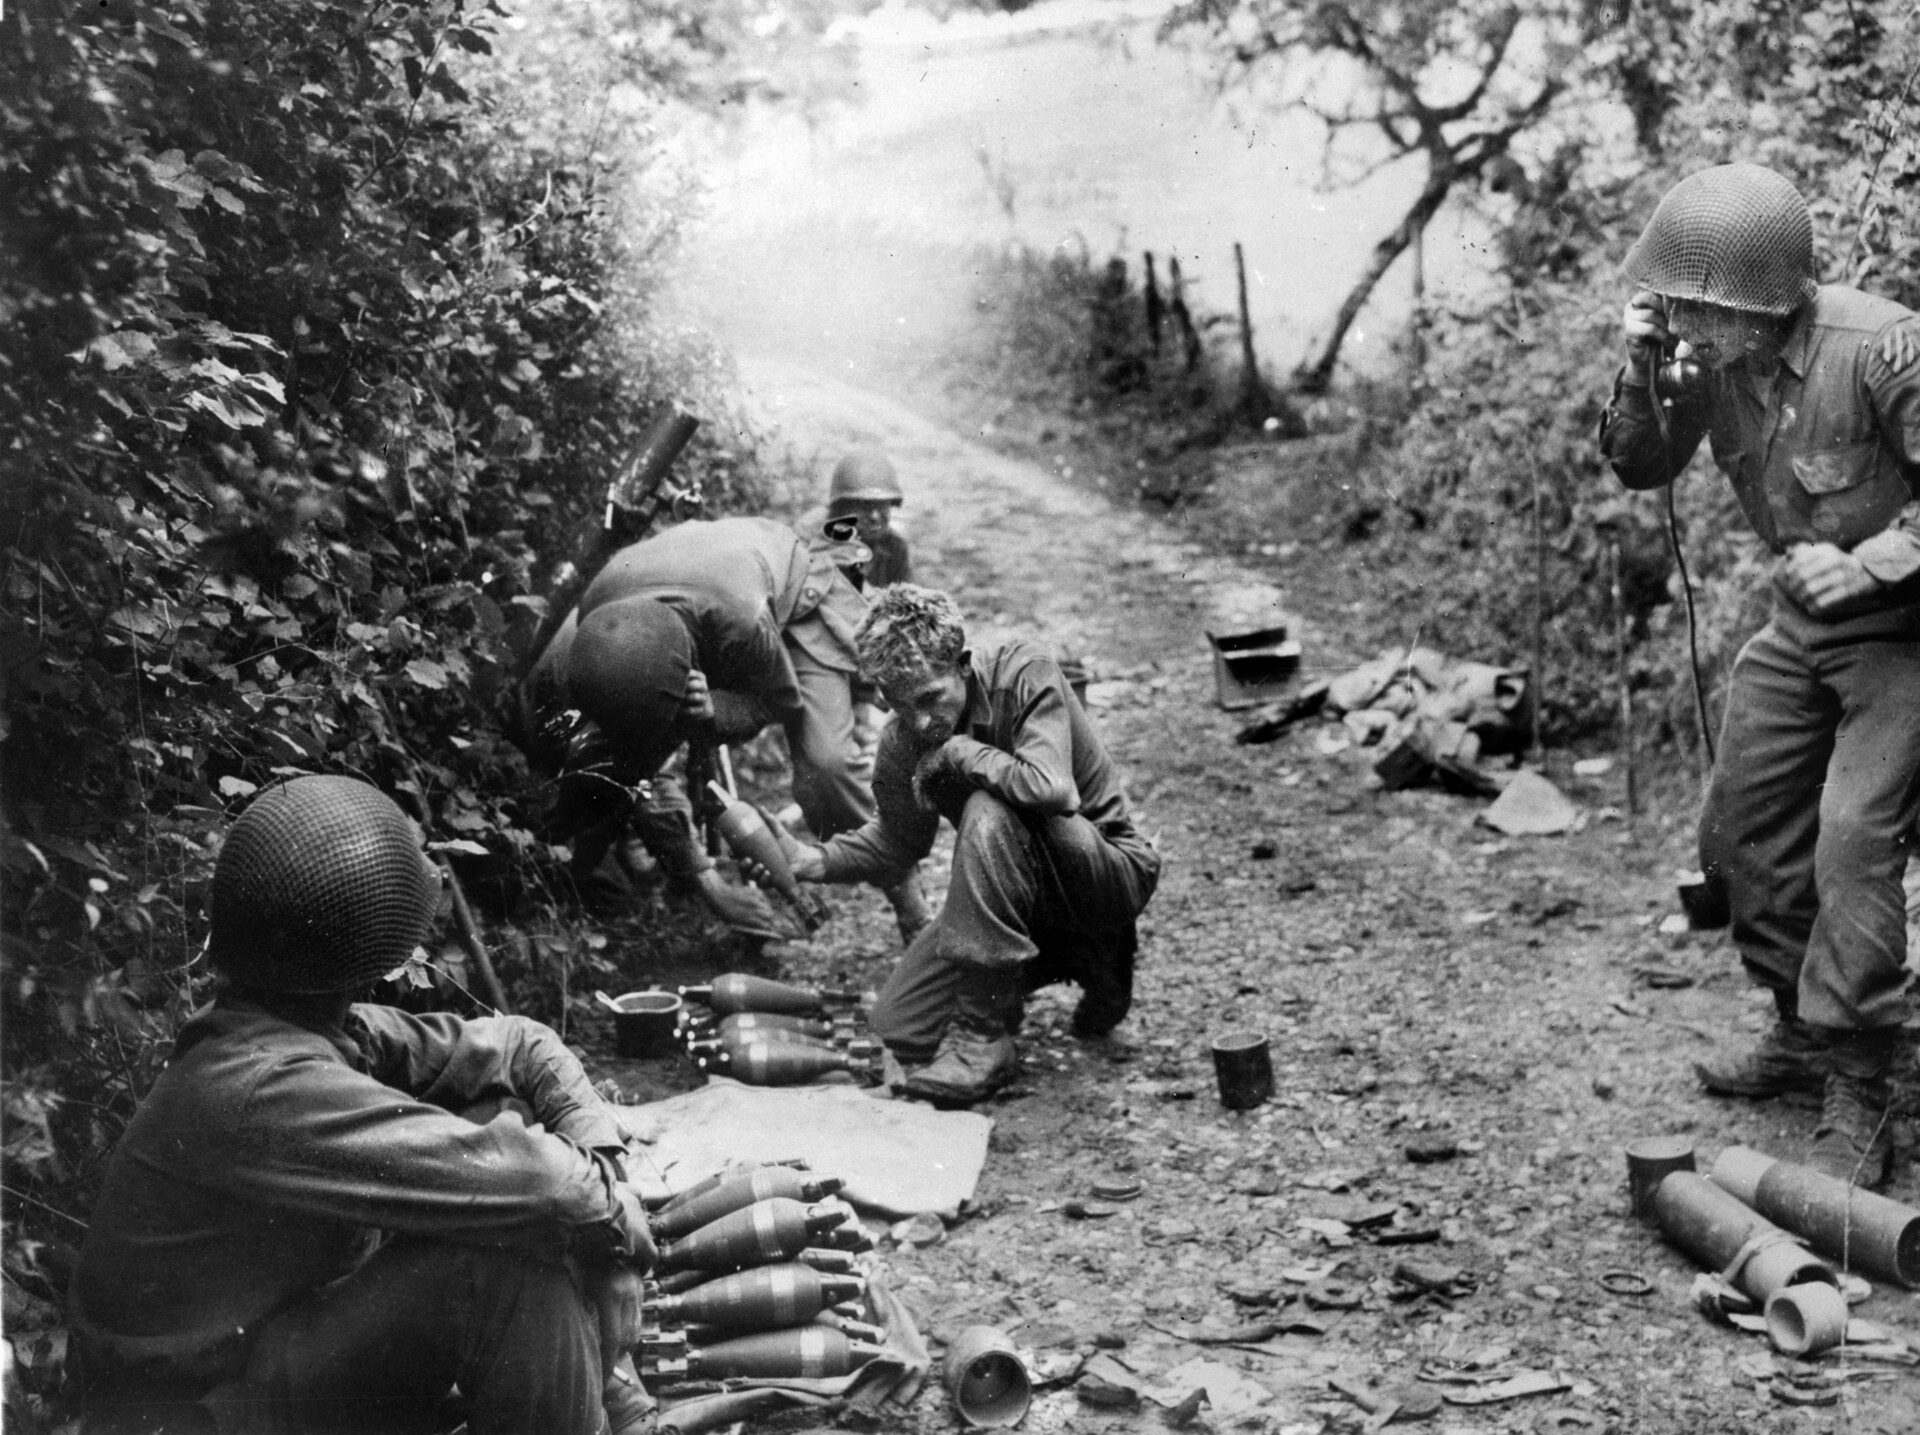 After landing in southern France in August 1944, a mortar squad of 3rd Infantry Division soldiers fires at entrenched German defenders. By this time Larimore and his soldiers of the 3rd Division were hardened combat veterans.